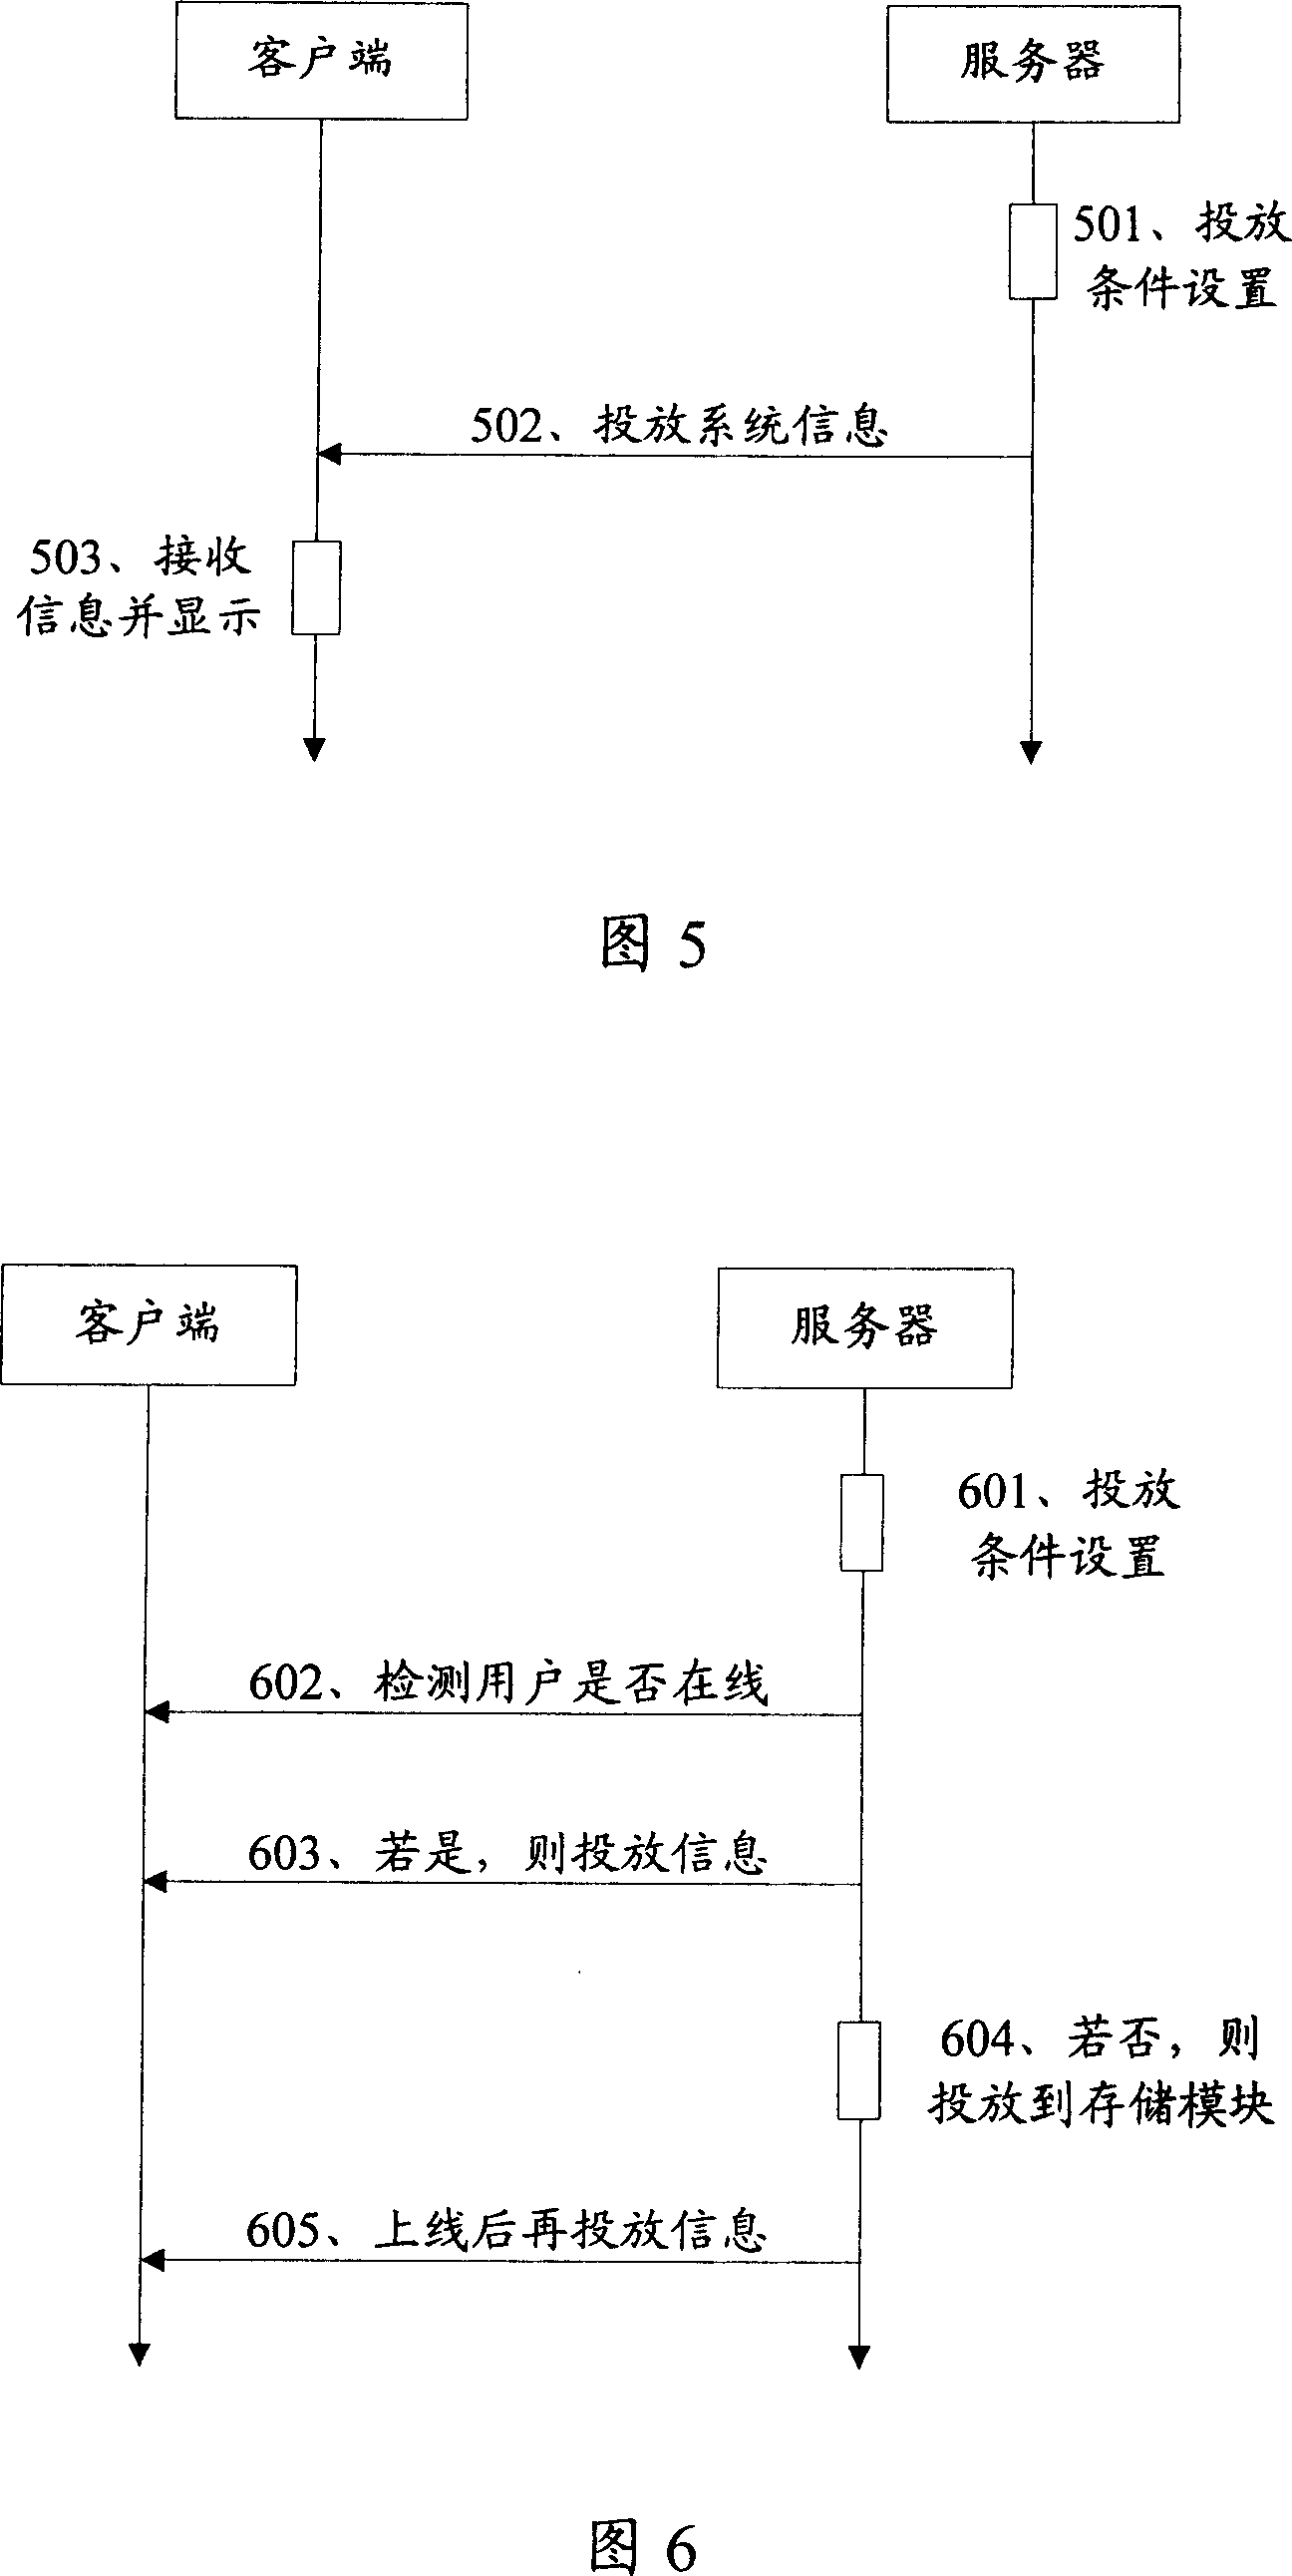 An information distribution method and system